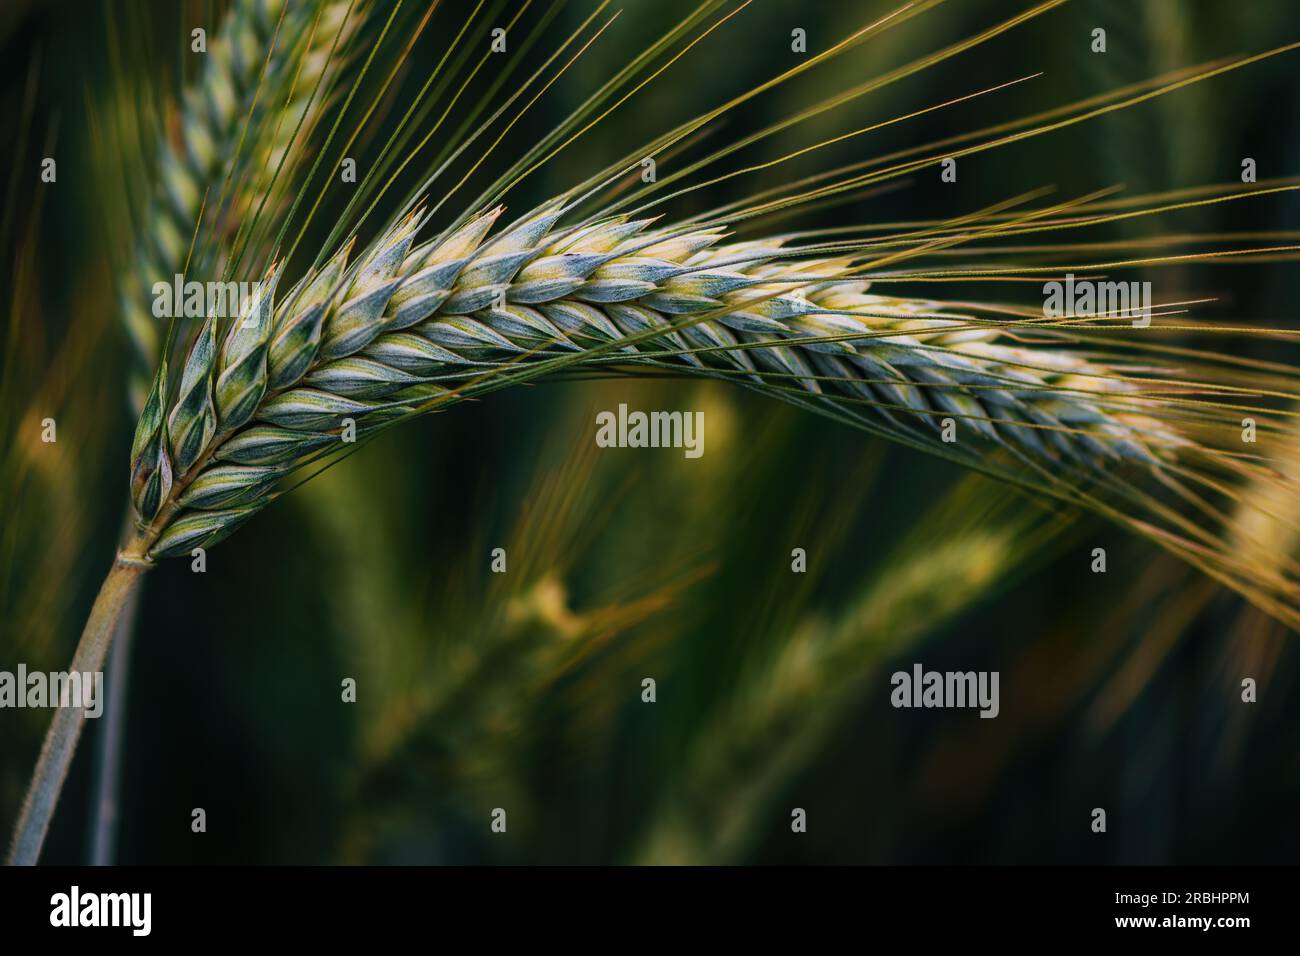 Unripe ear of common wheat in field, selective focus Stock Photo